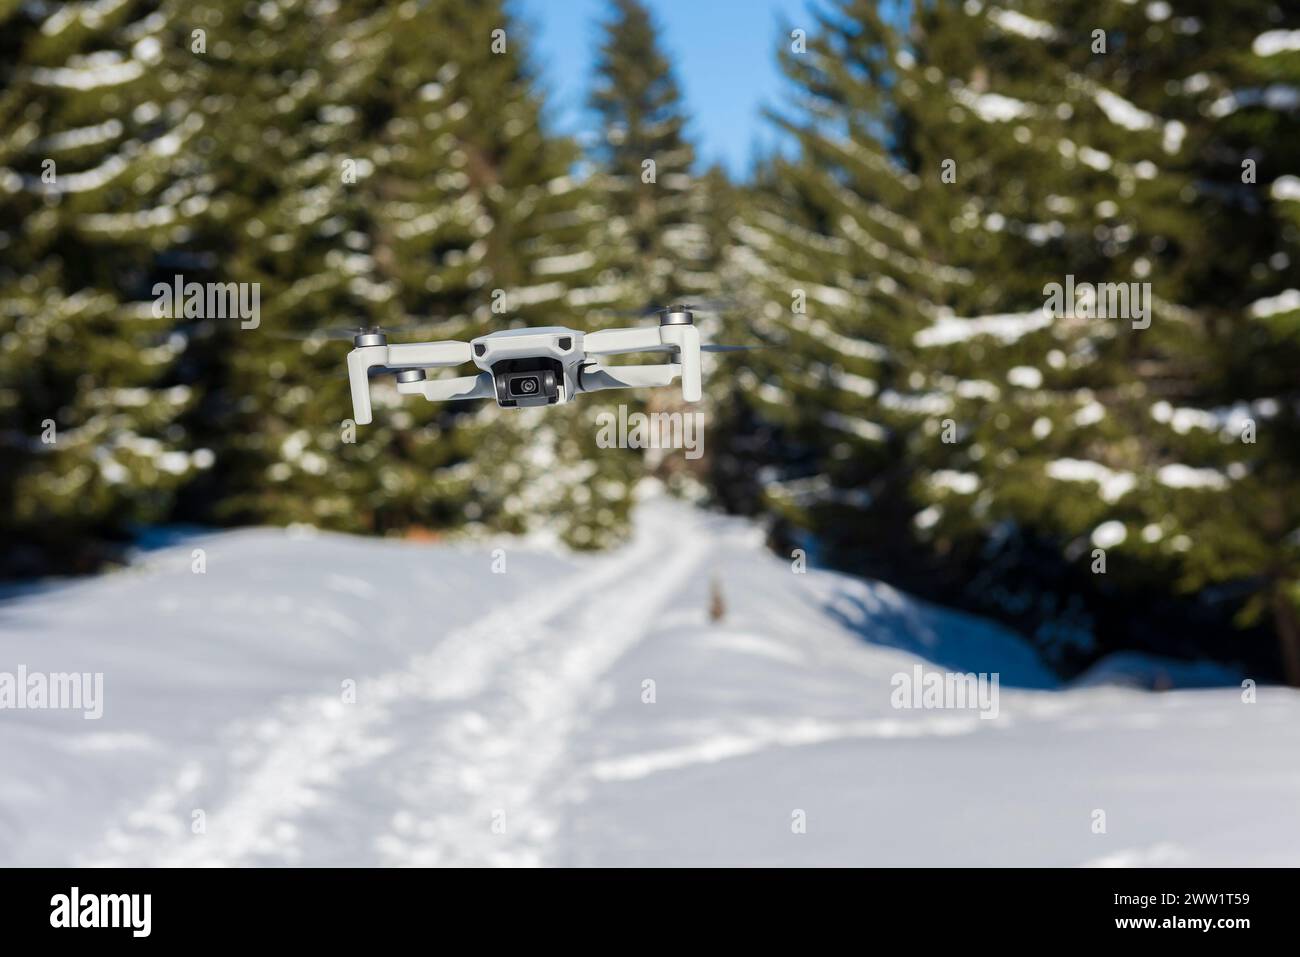 A small drone recording footage in the forest surrounded with a snow. Stock Photo